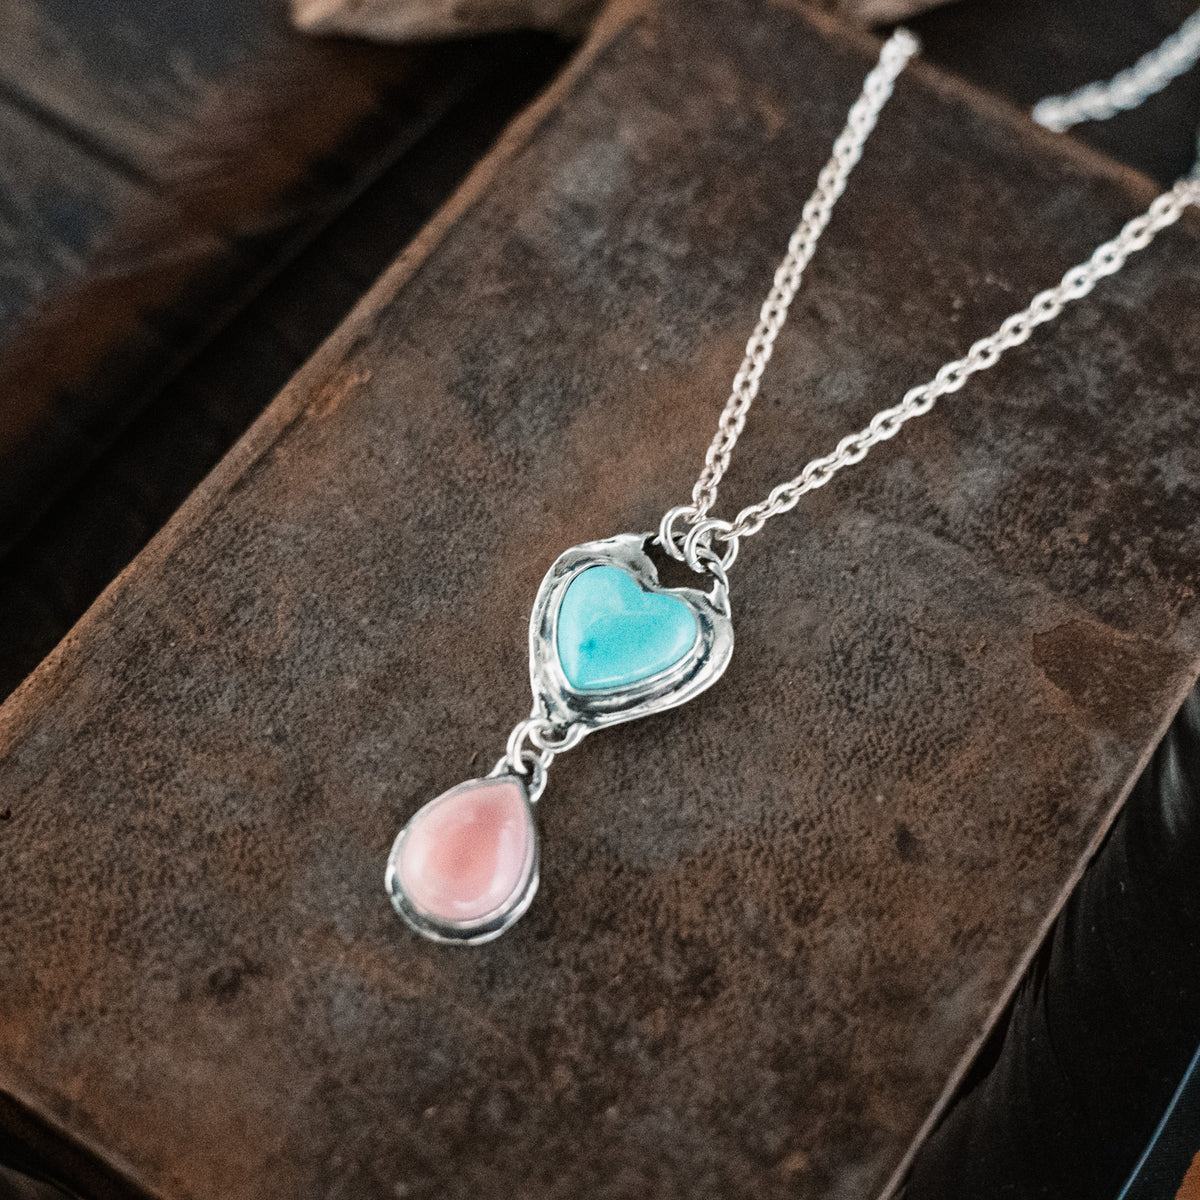 Make a Wish Turquoise Necklace